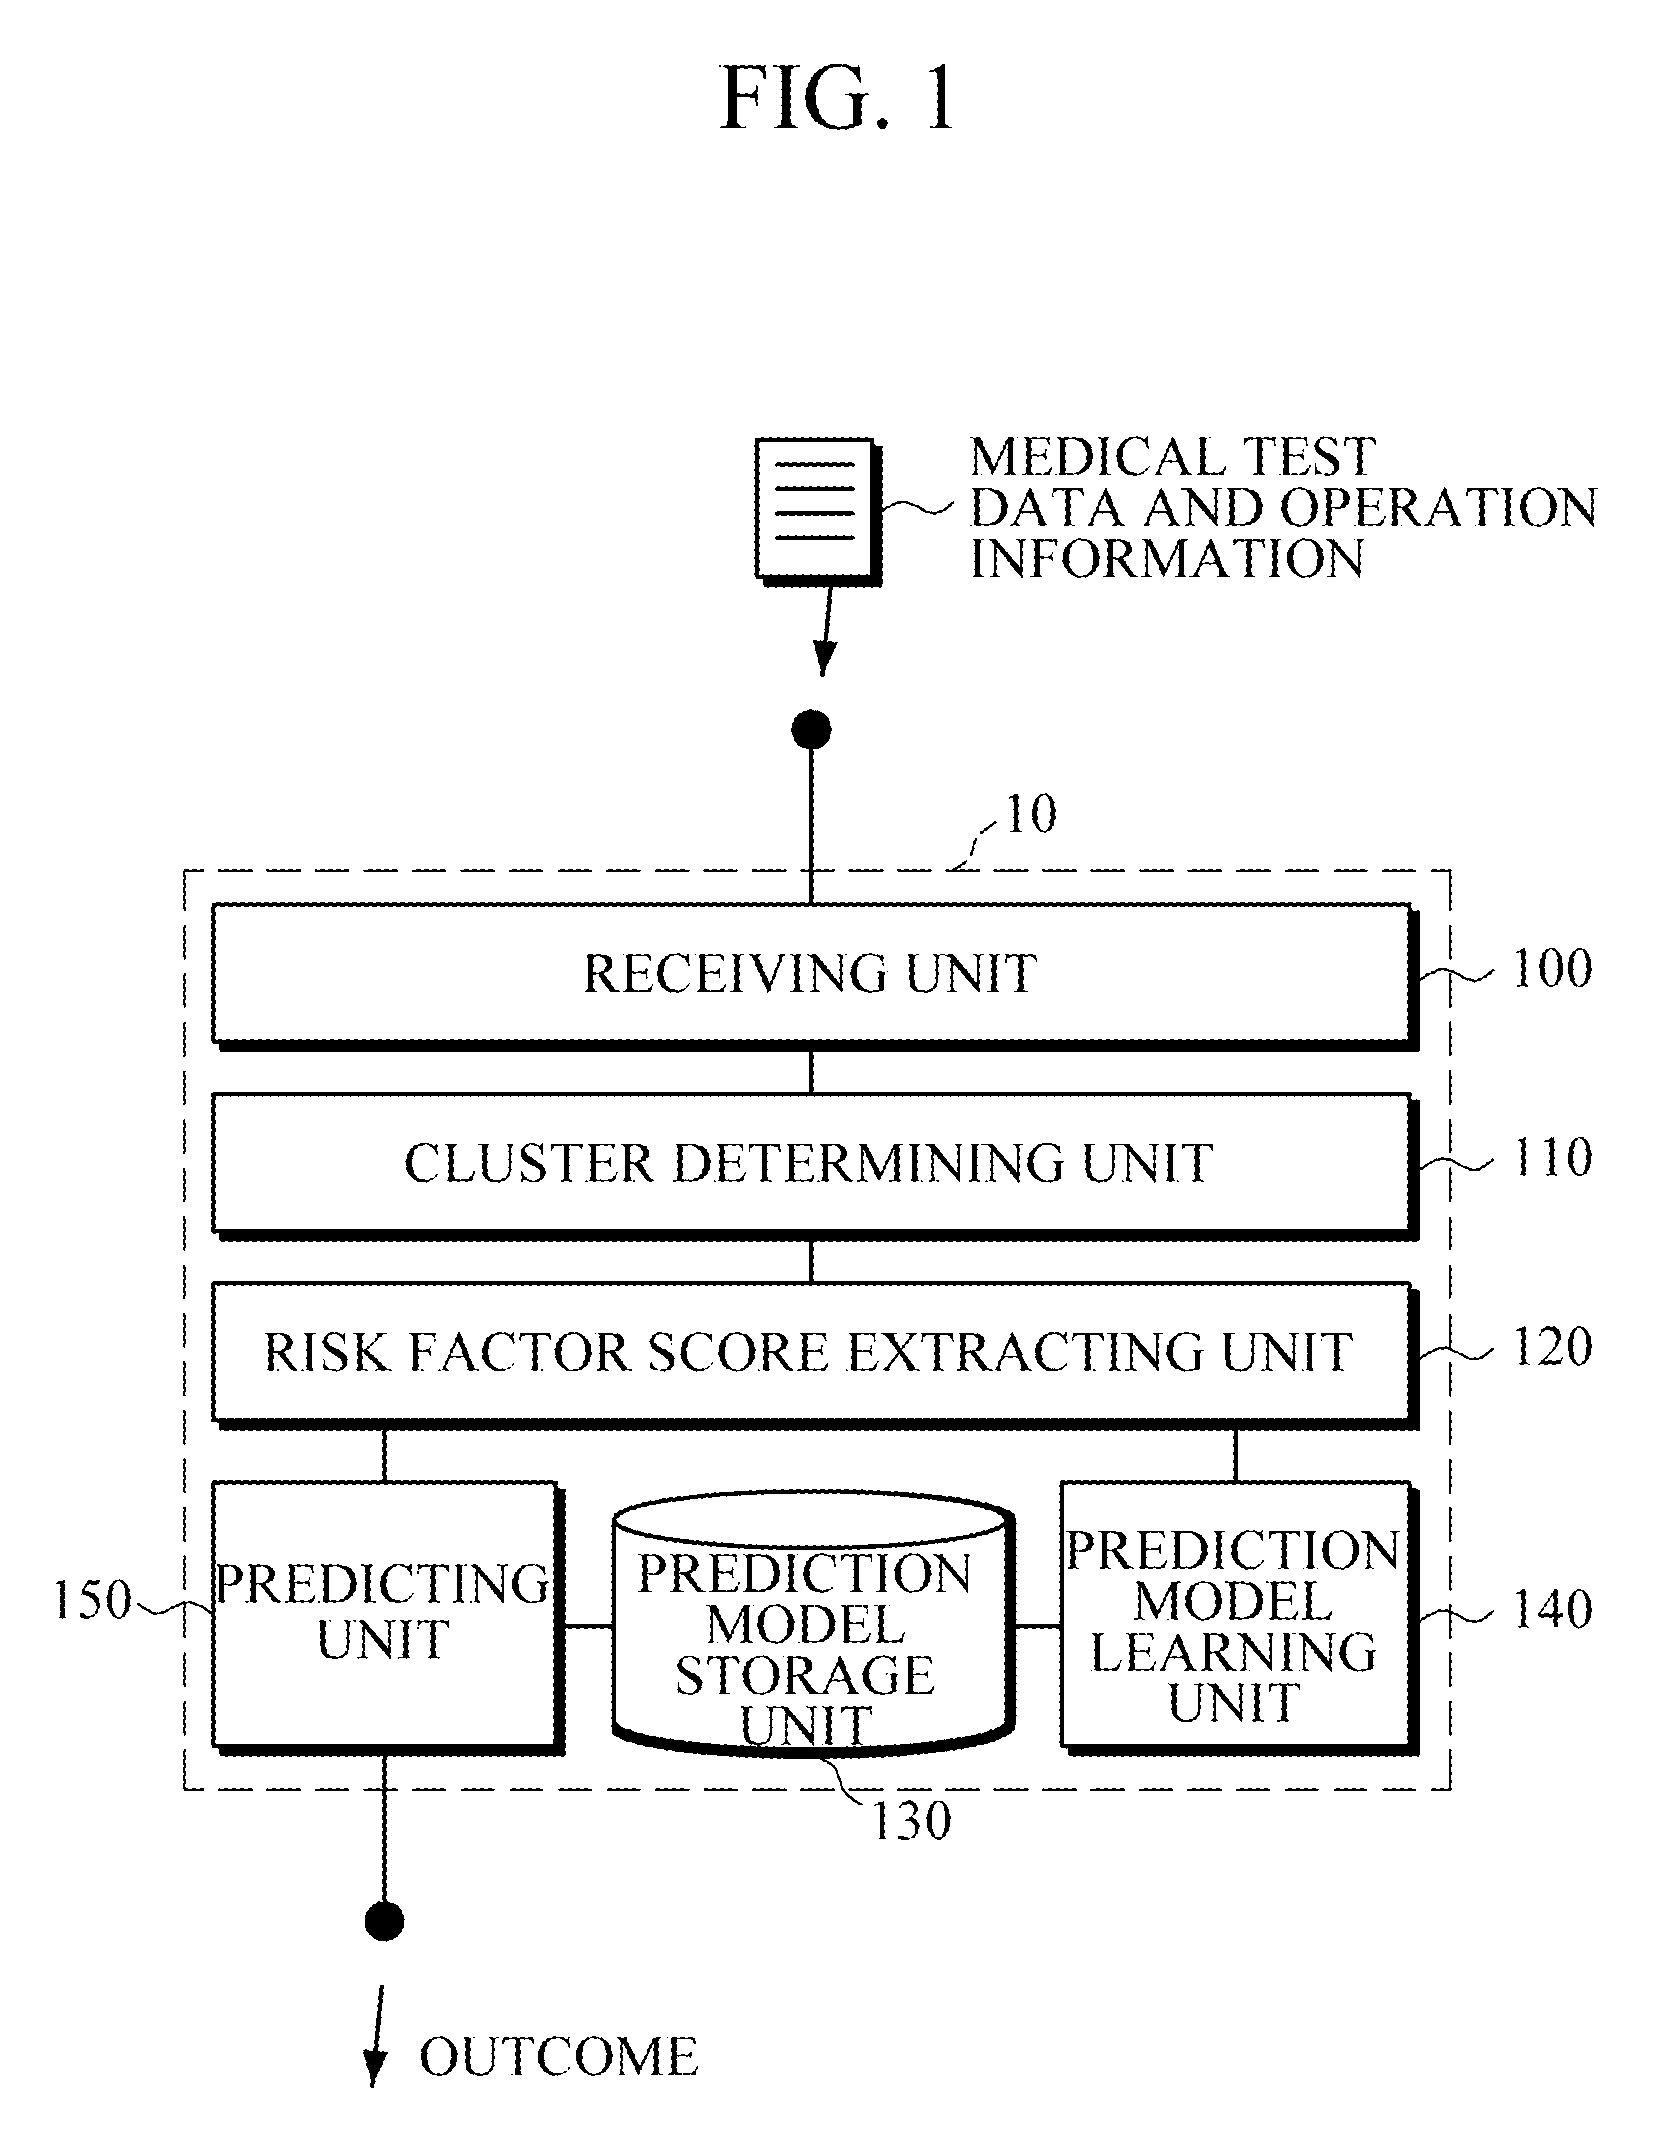 Apparatus and method for predicting potential change of coronary artery calcification (CAC) level